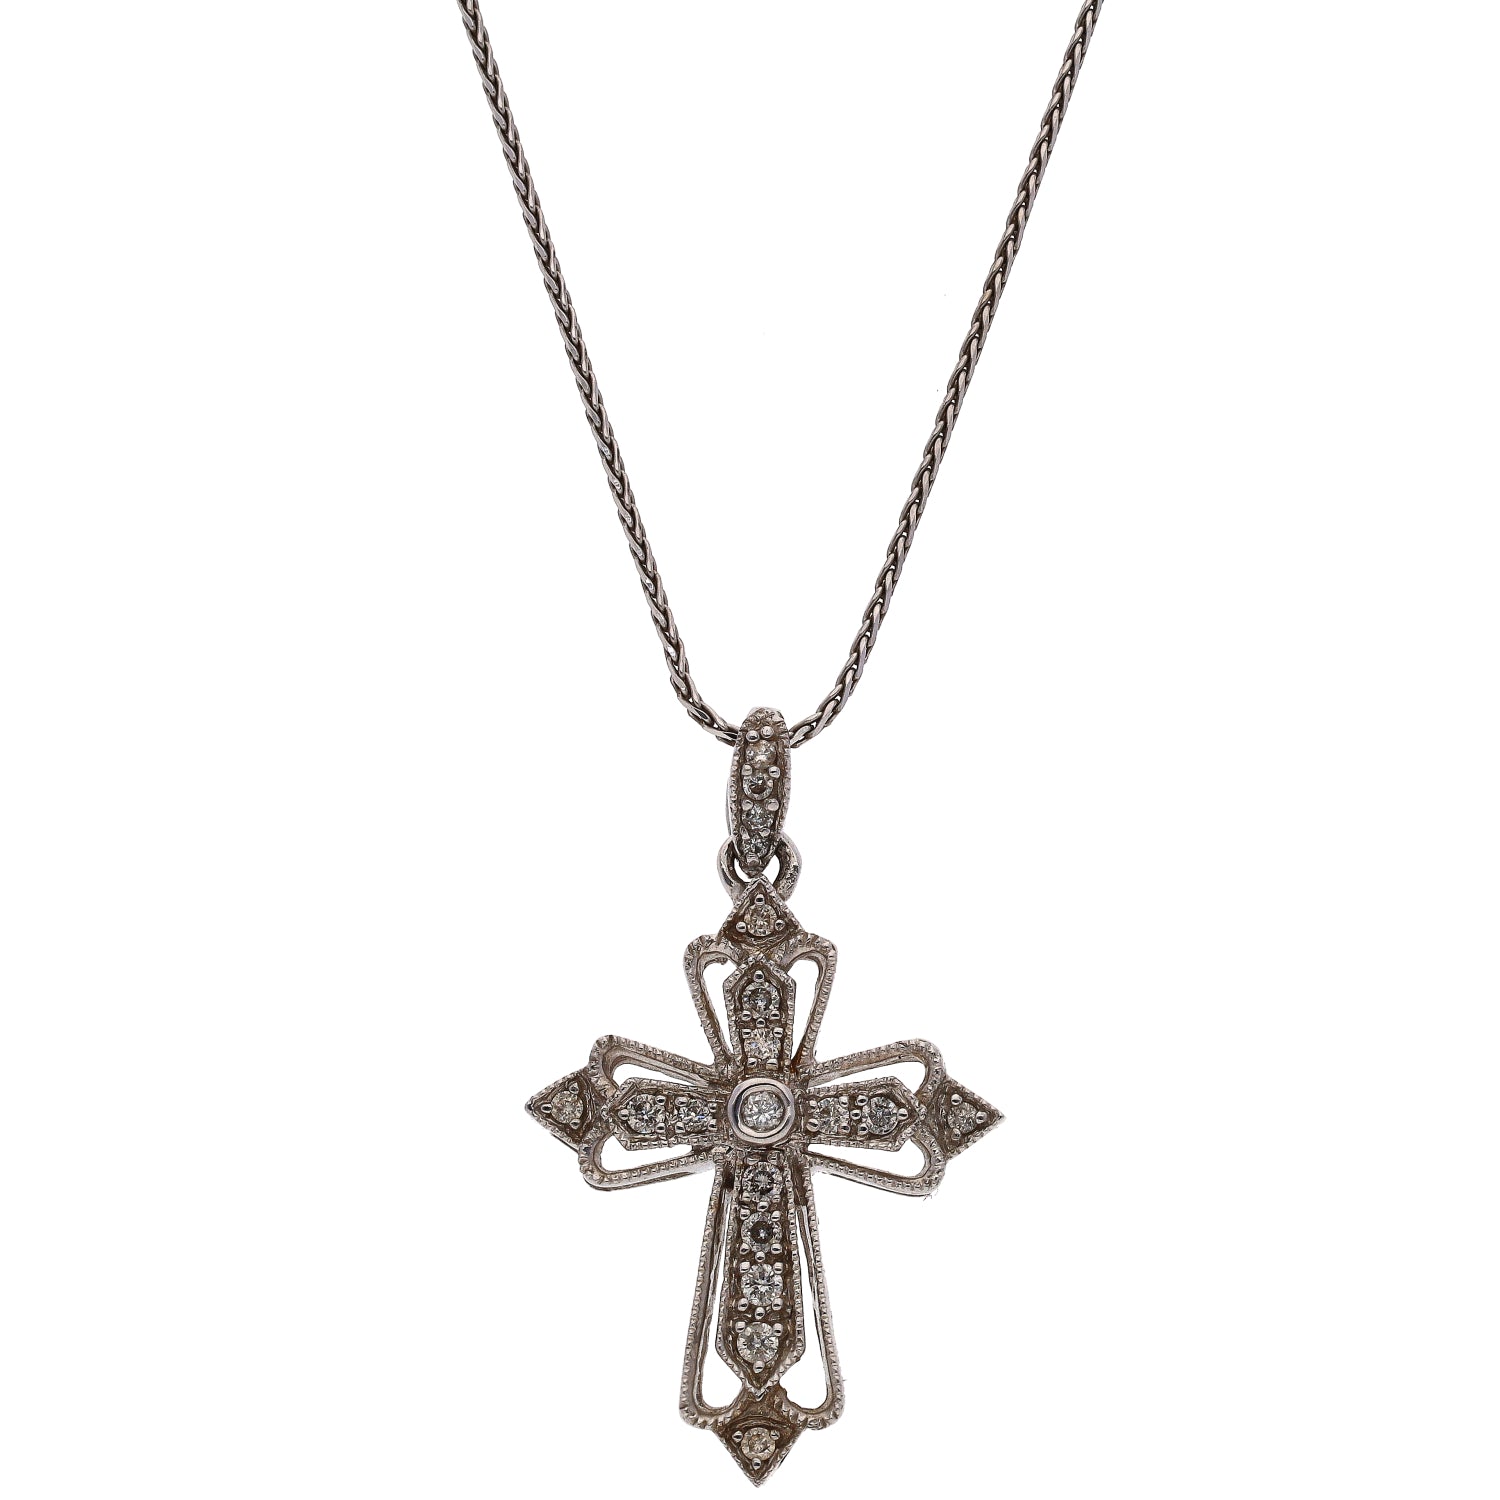 14K White Gold and Diamond Cross Necklace with 18 Inch Chain